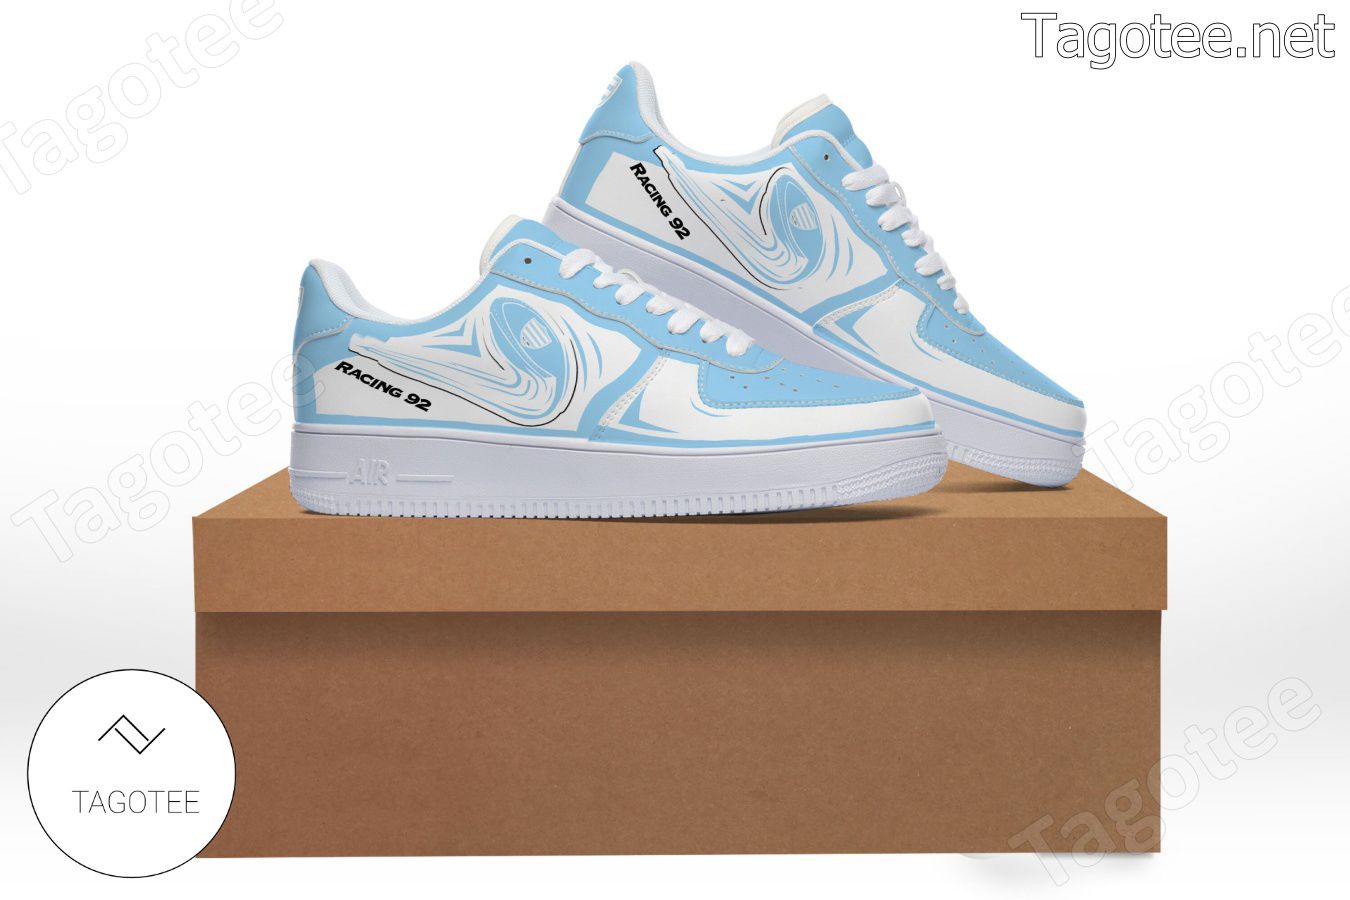 Racing 92 Logo Air Force 1 Shoes